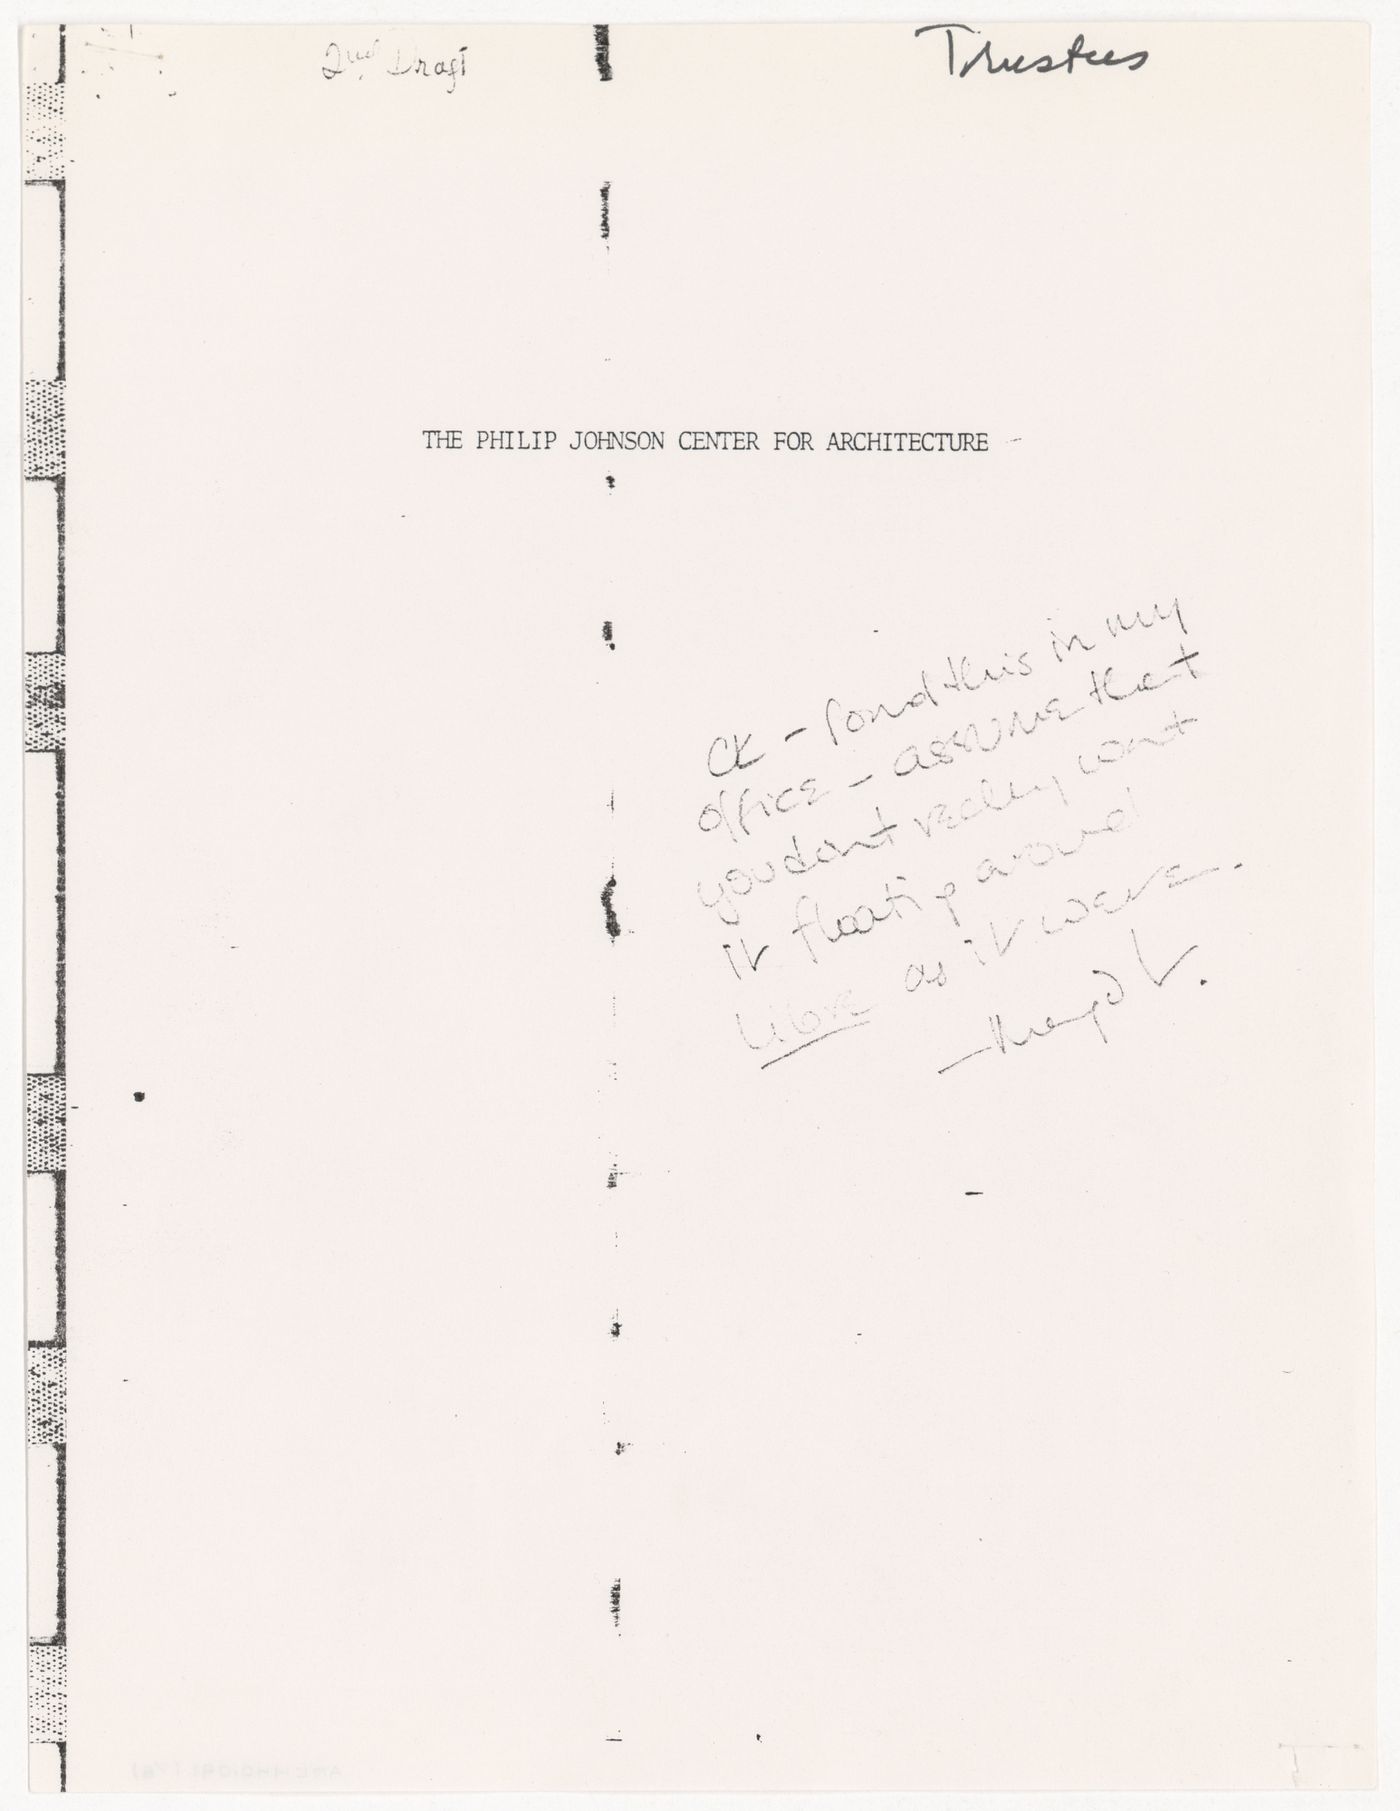 Report about the Philip Johnson Center for Architecture with handwritten note on cover